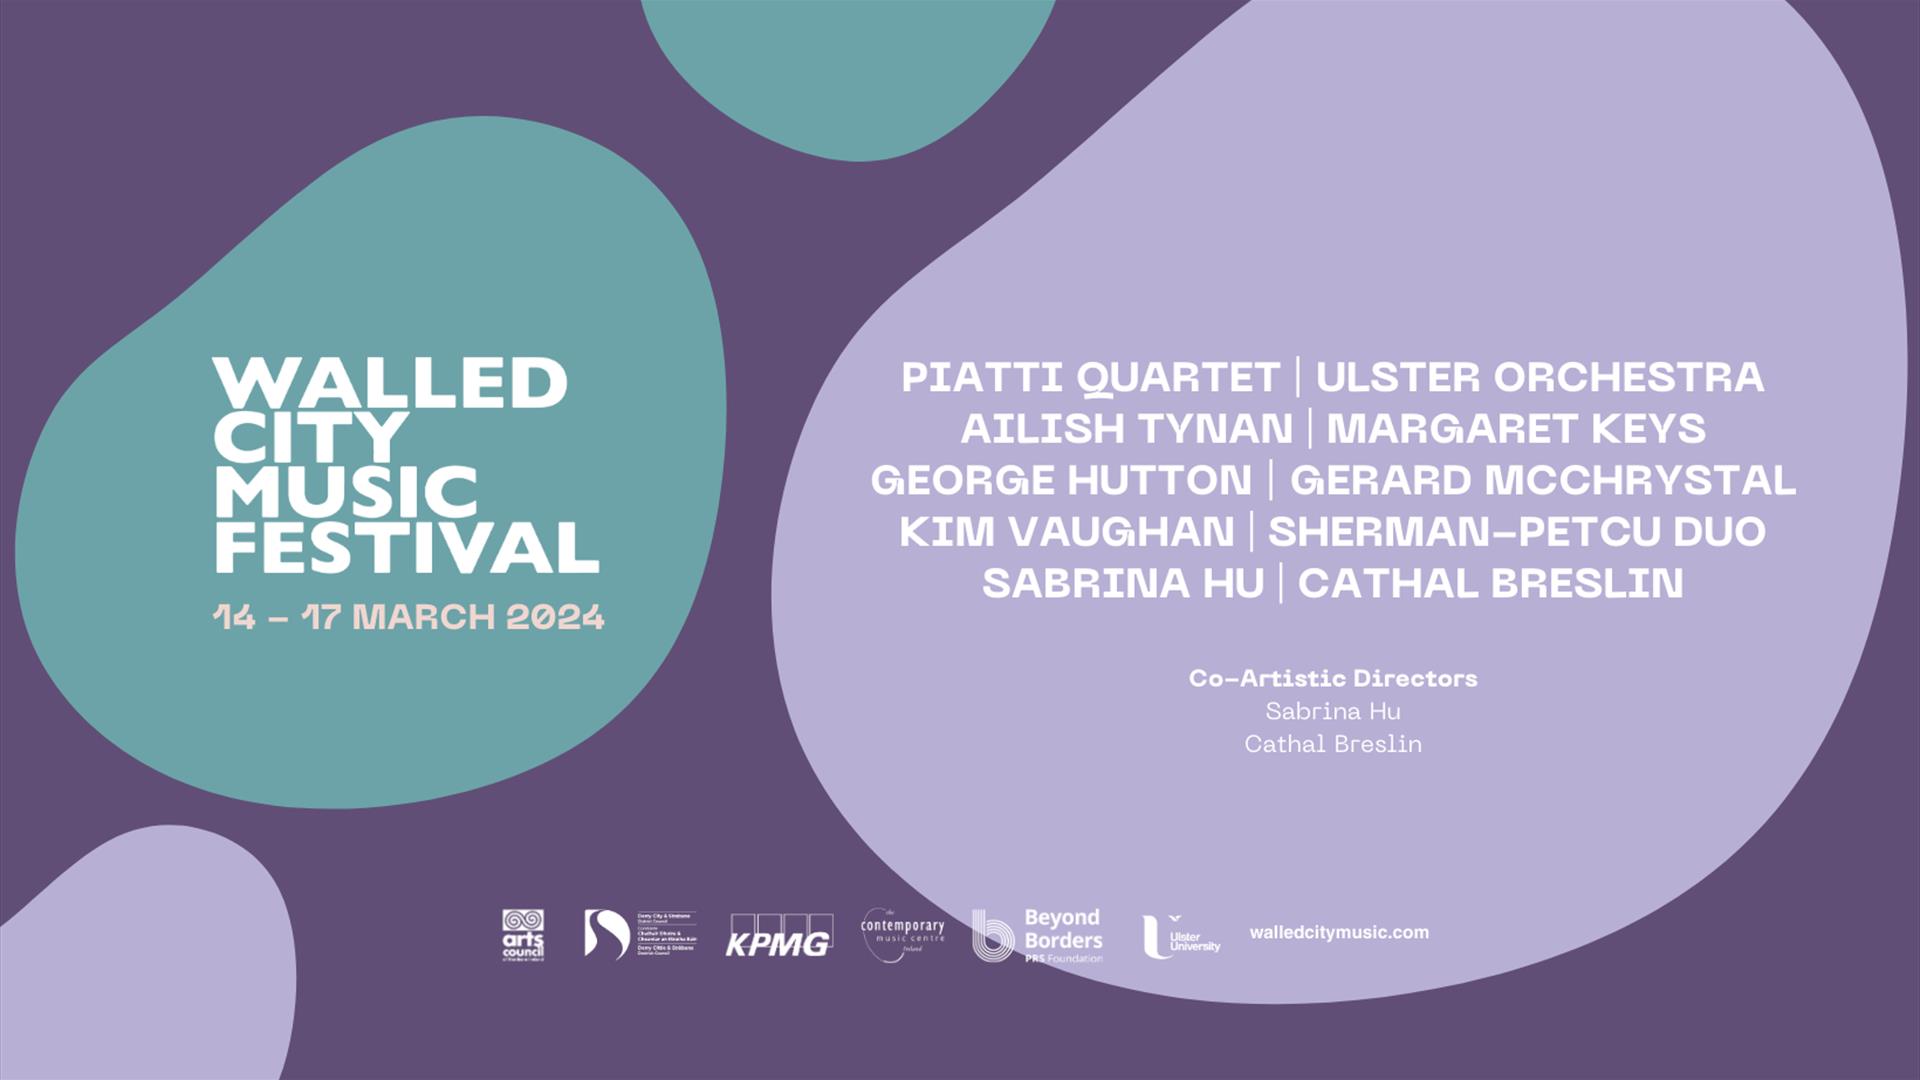 Promotional image for the Walled City Music Festival, listing out the featured acts.